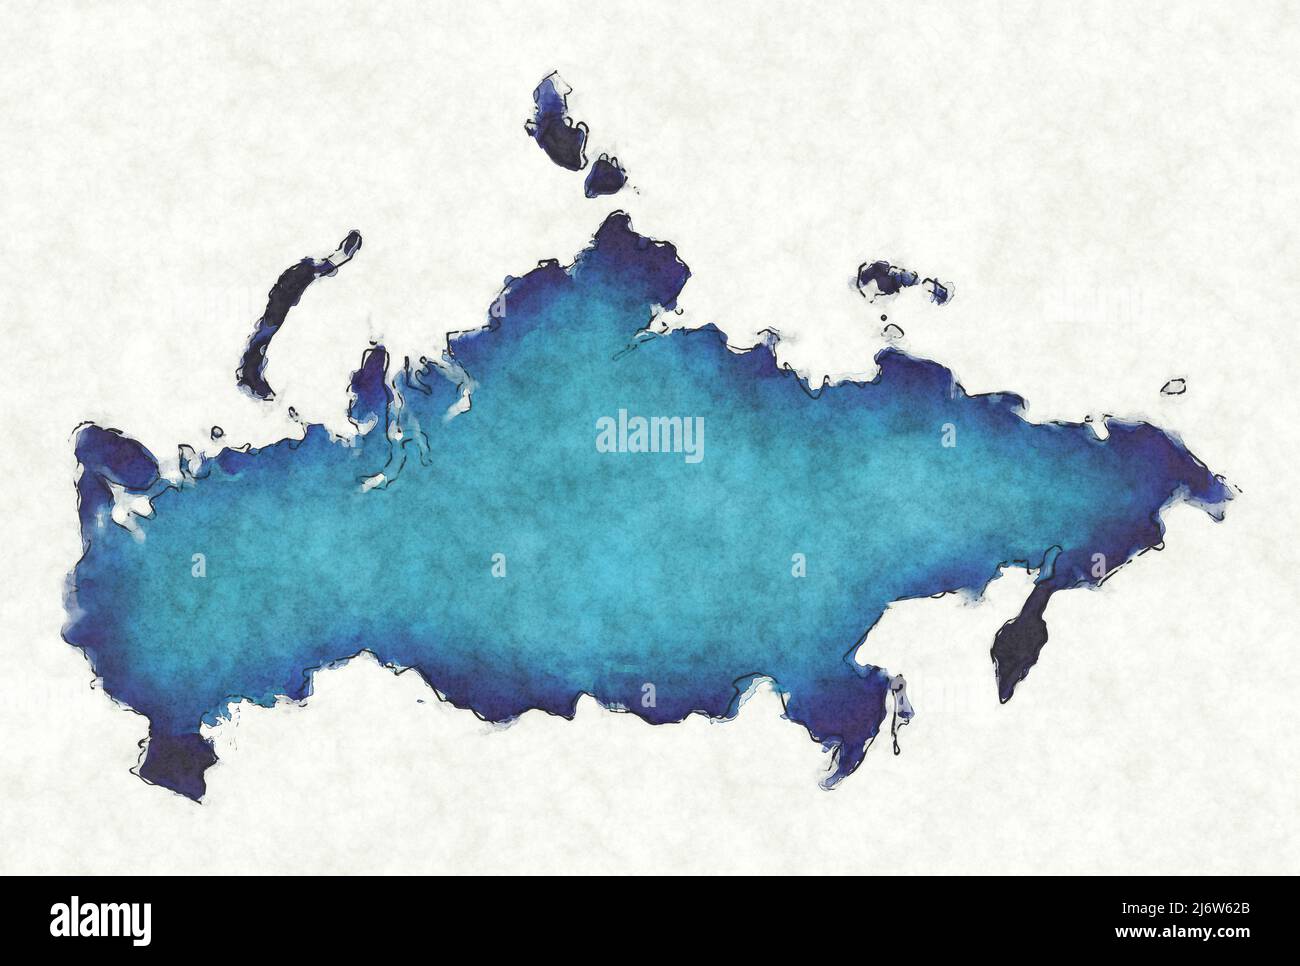 Russia map with drawn lines and blue watercolor illustration Stock Photo